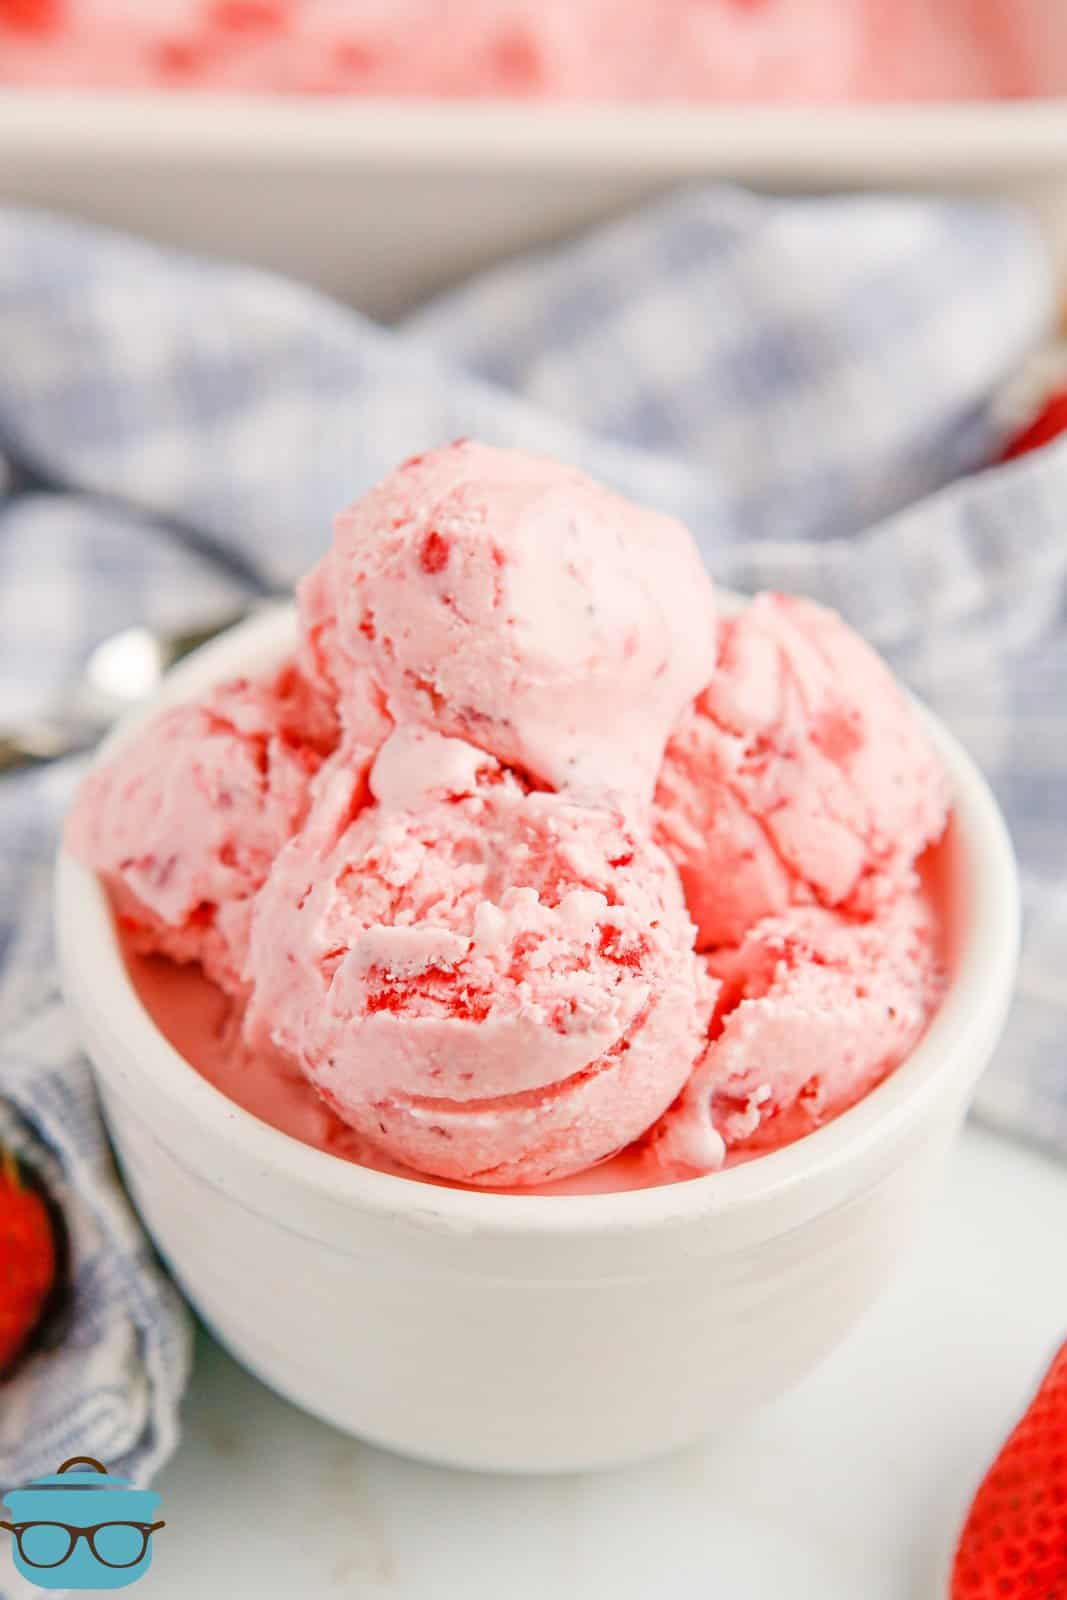 Scoops of No-Churn Strawberry Ice Cream on white bowl.